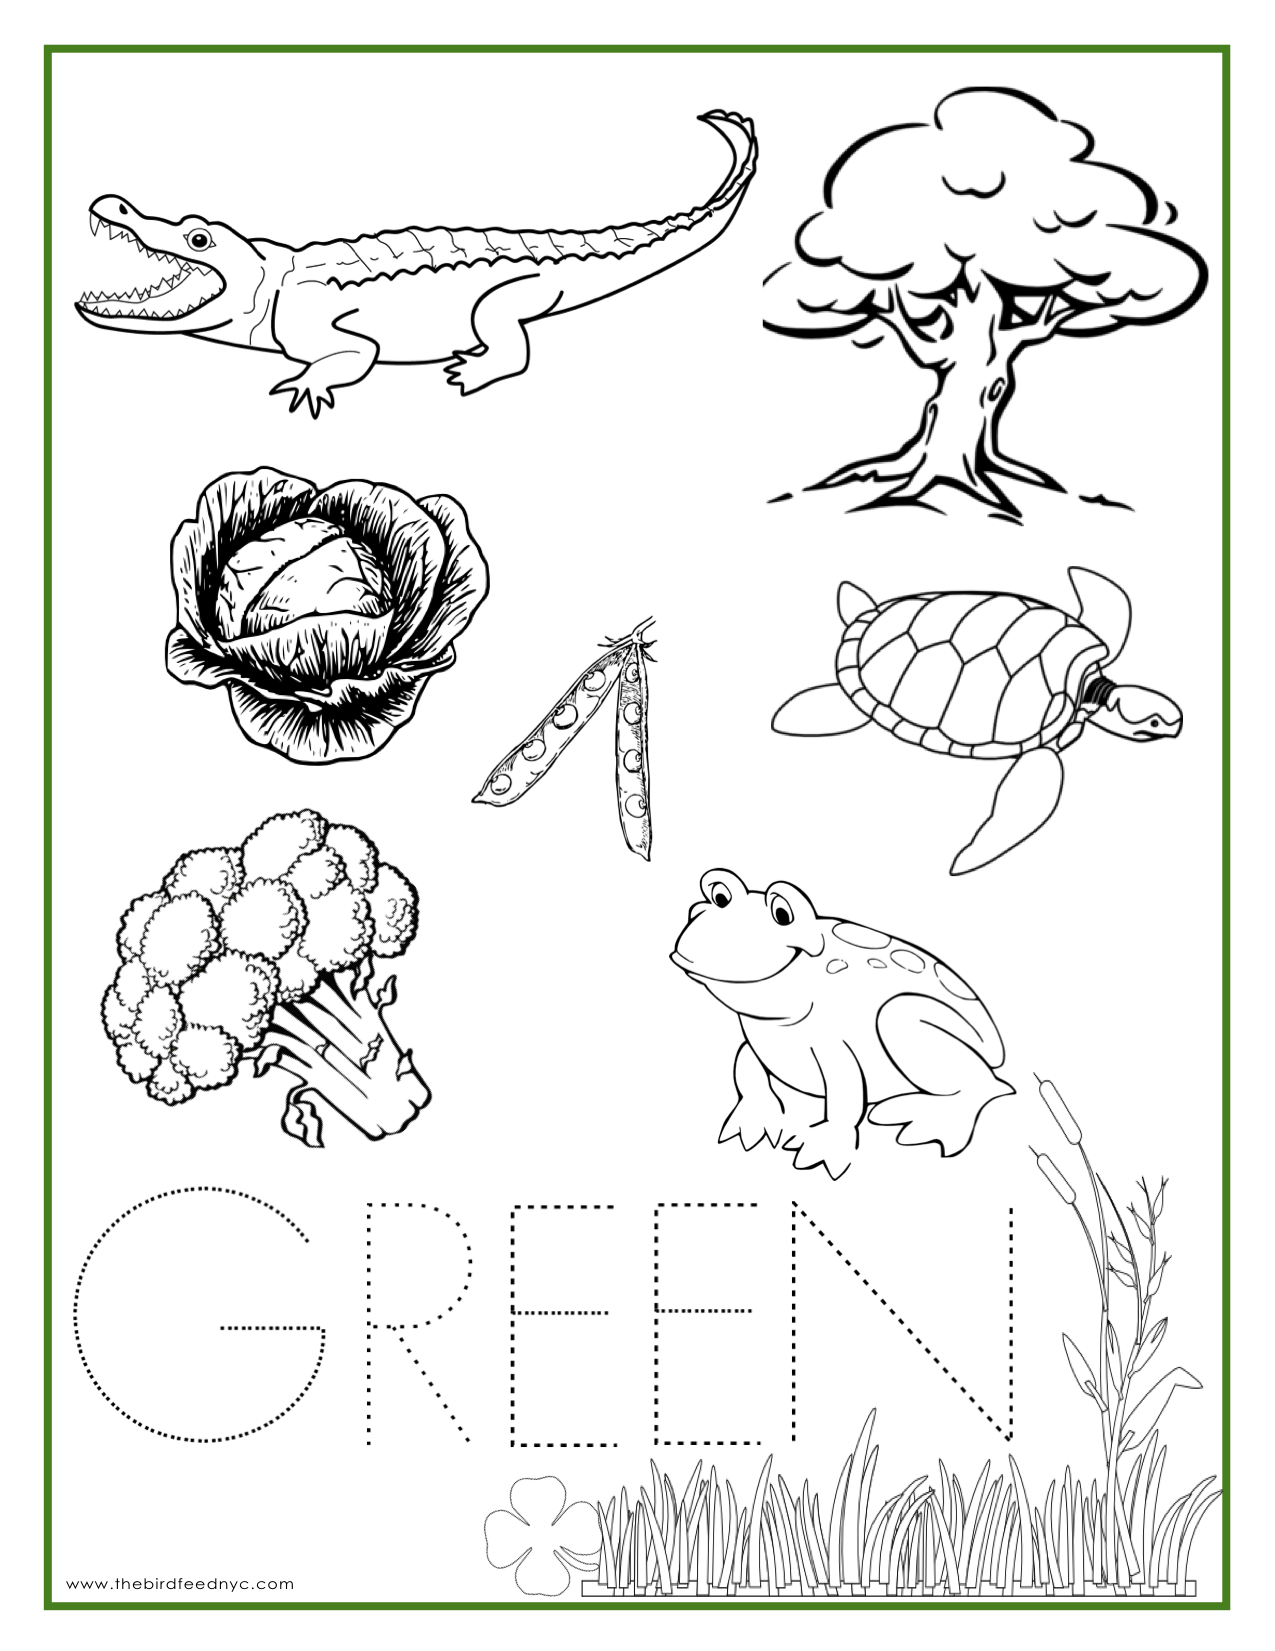 The Color Green Coloring Pages - Coloring Home